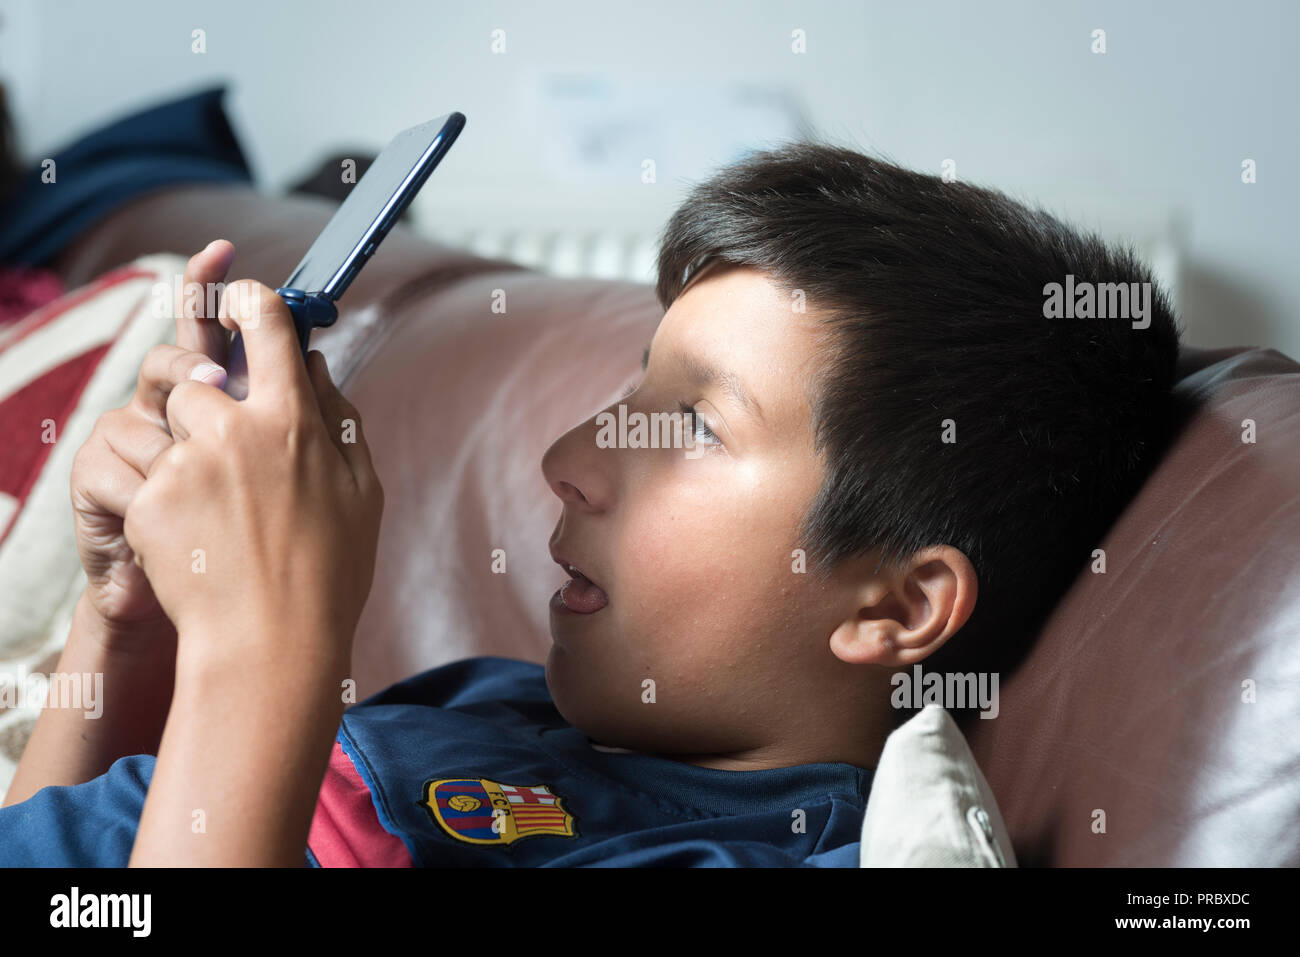 Ocular deviation.Excessive gaming oand  electonic gadgets use could make children cross-eyed-boy plays computer game on portable game console Stock Photo